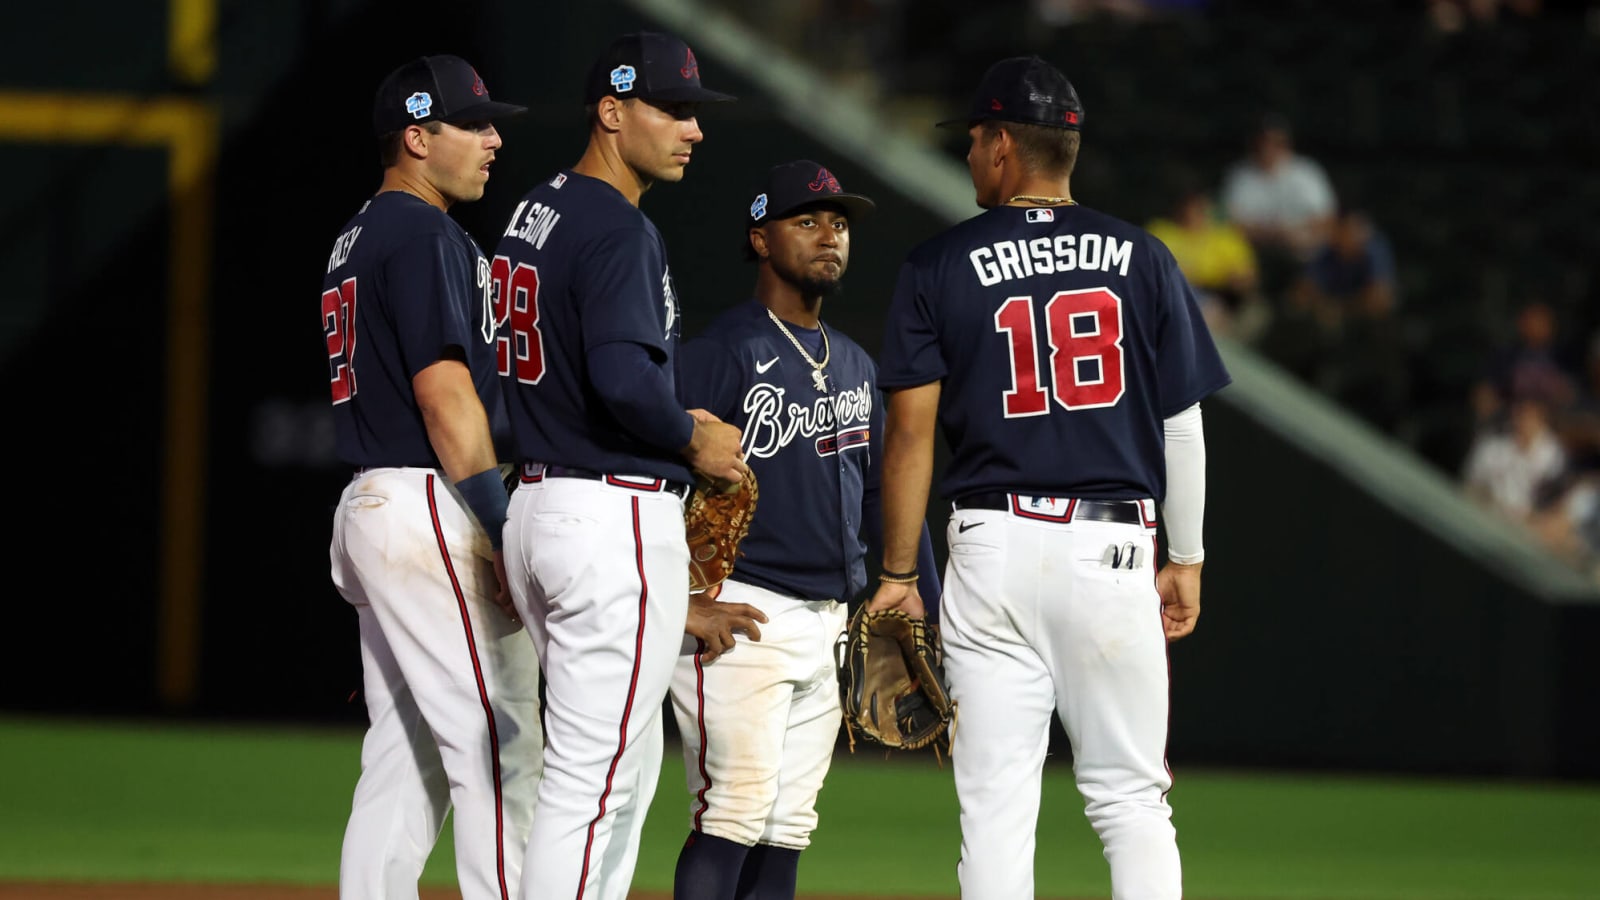 Bleacher Report gives the Braves infielders favorable rankings